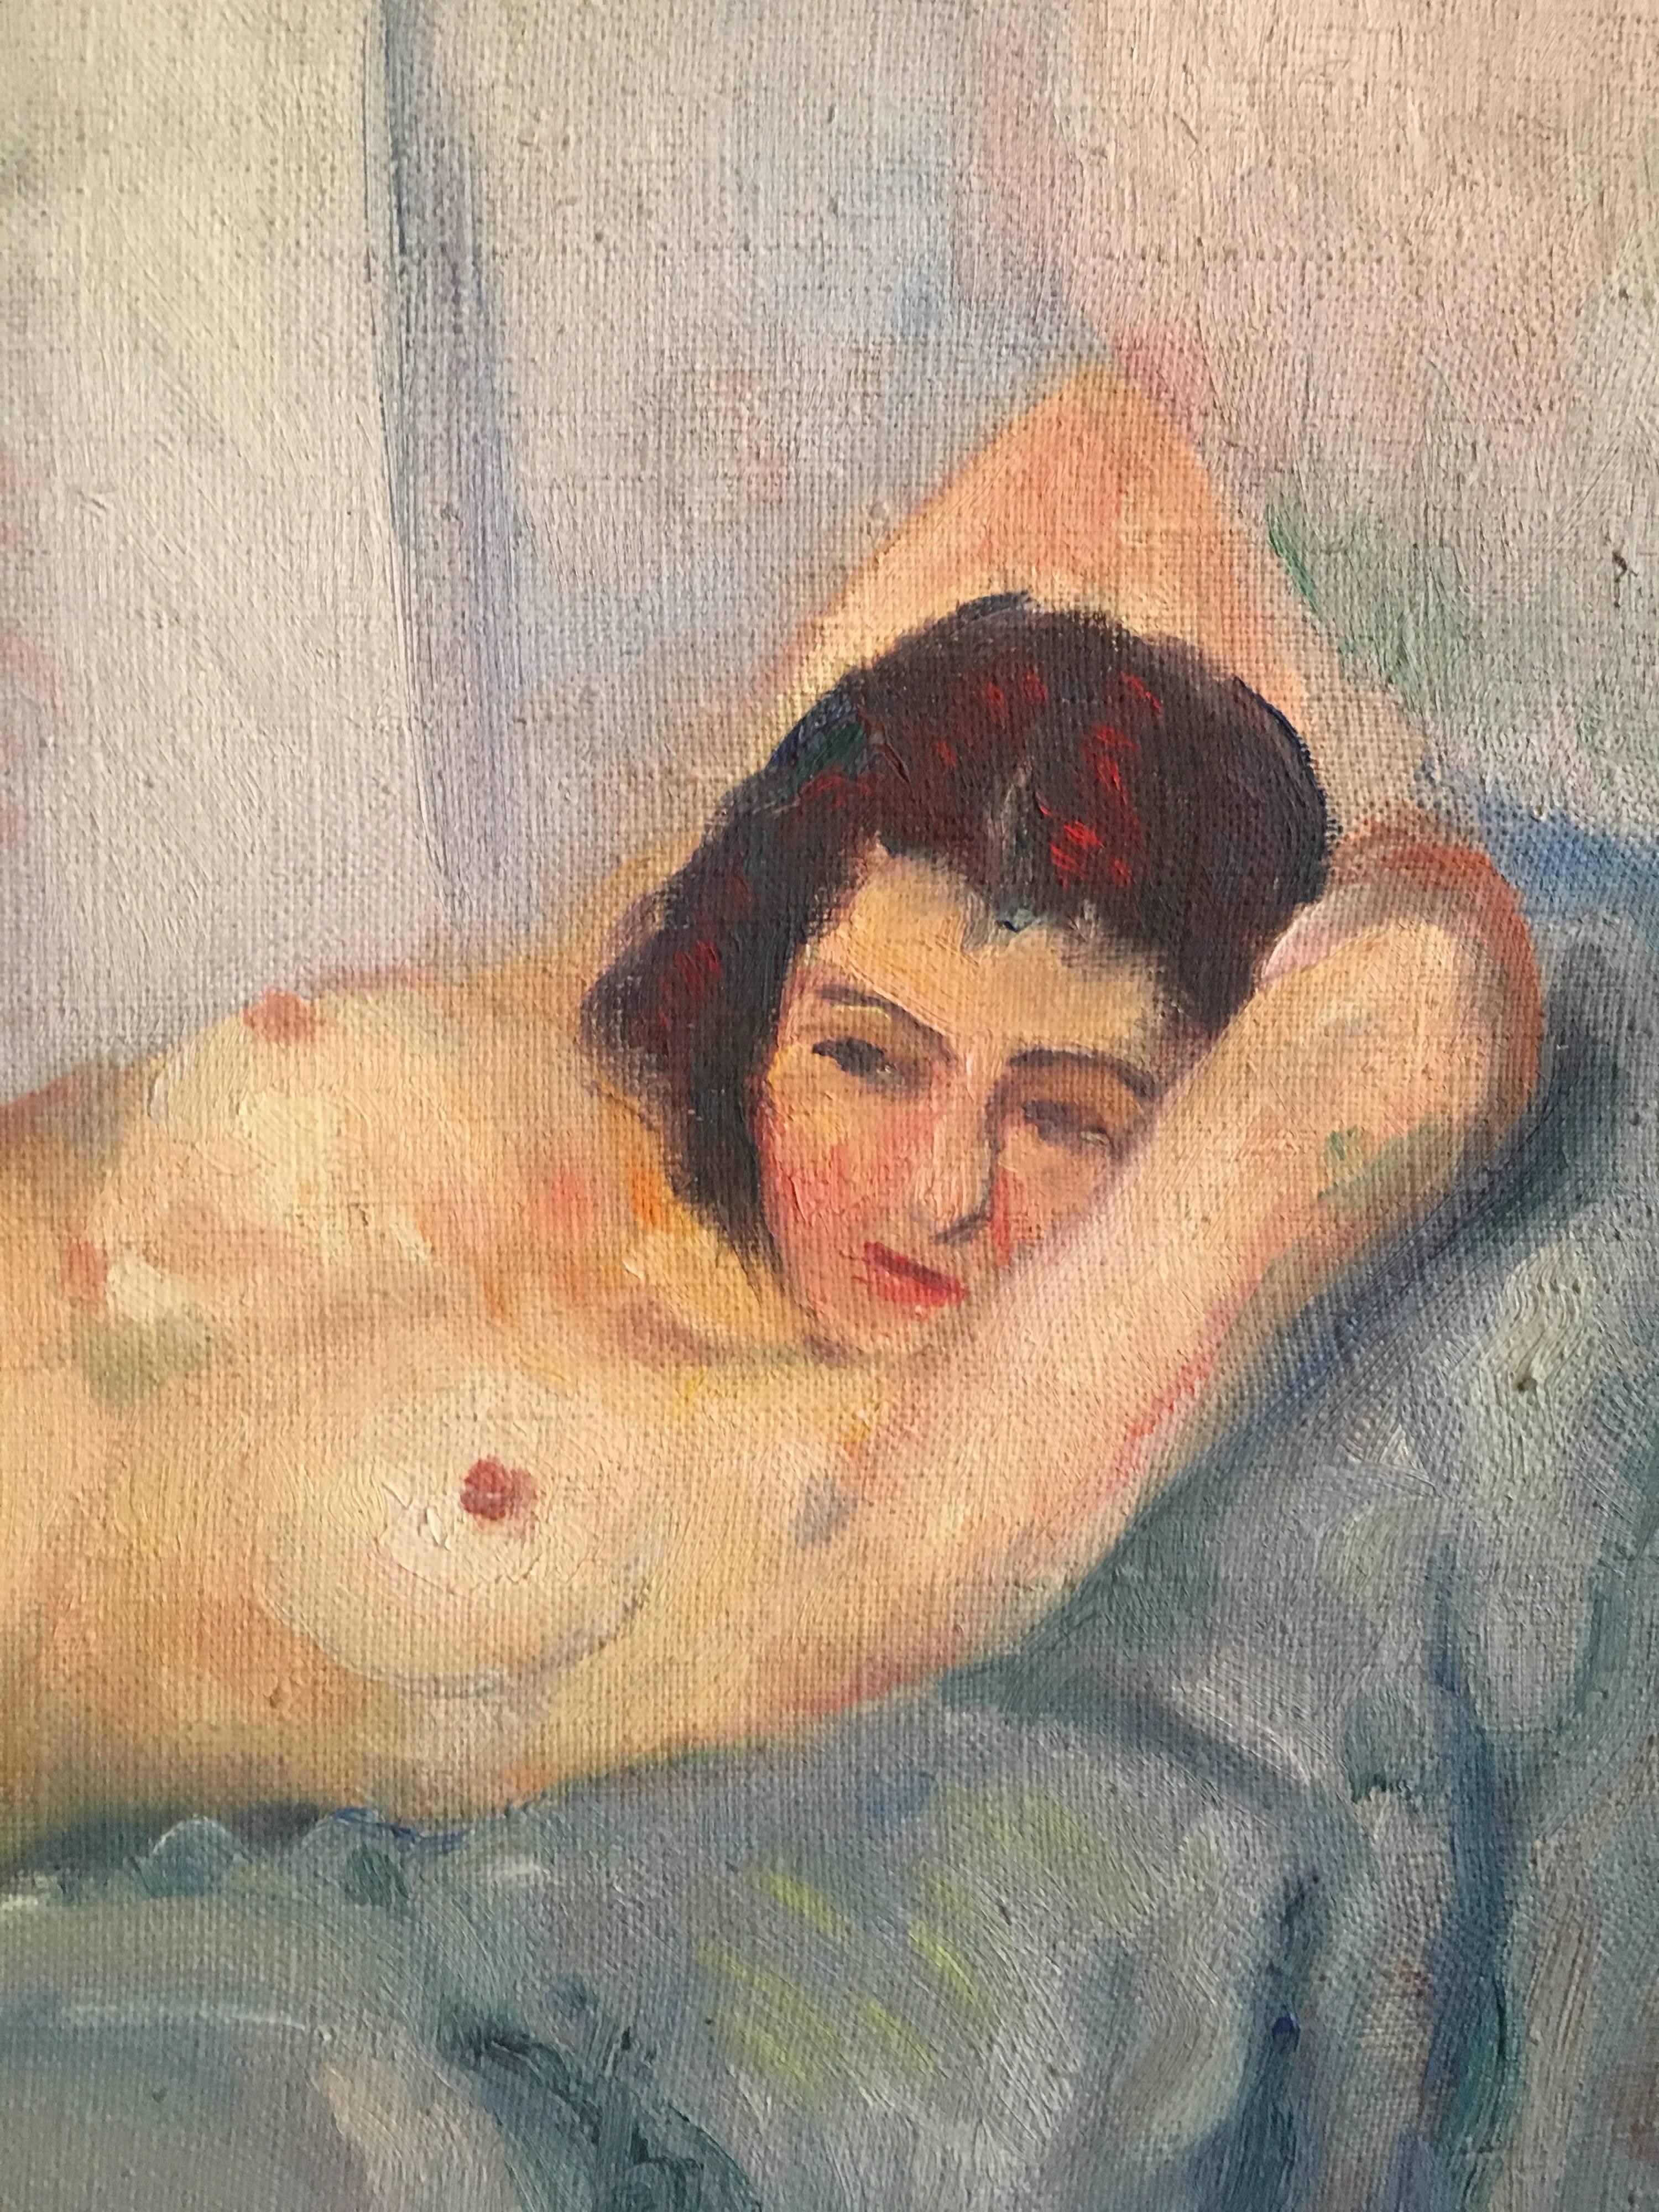 The Reclining Nude
French School, Early 20th Century
Oil painting on canvas, unframed
Canvas size: 13 x 15.5 inches

Lovely 1930's period French Impressionist oil painting - superb mix of post-impressionism combined with a Fauvist palette also.